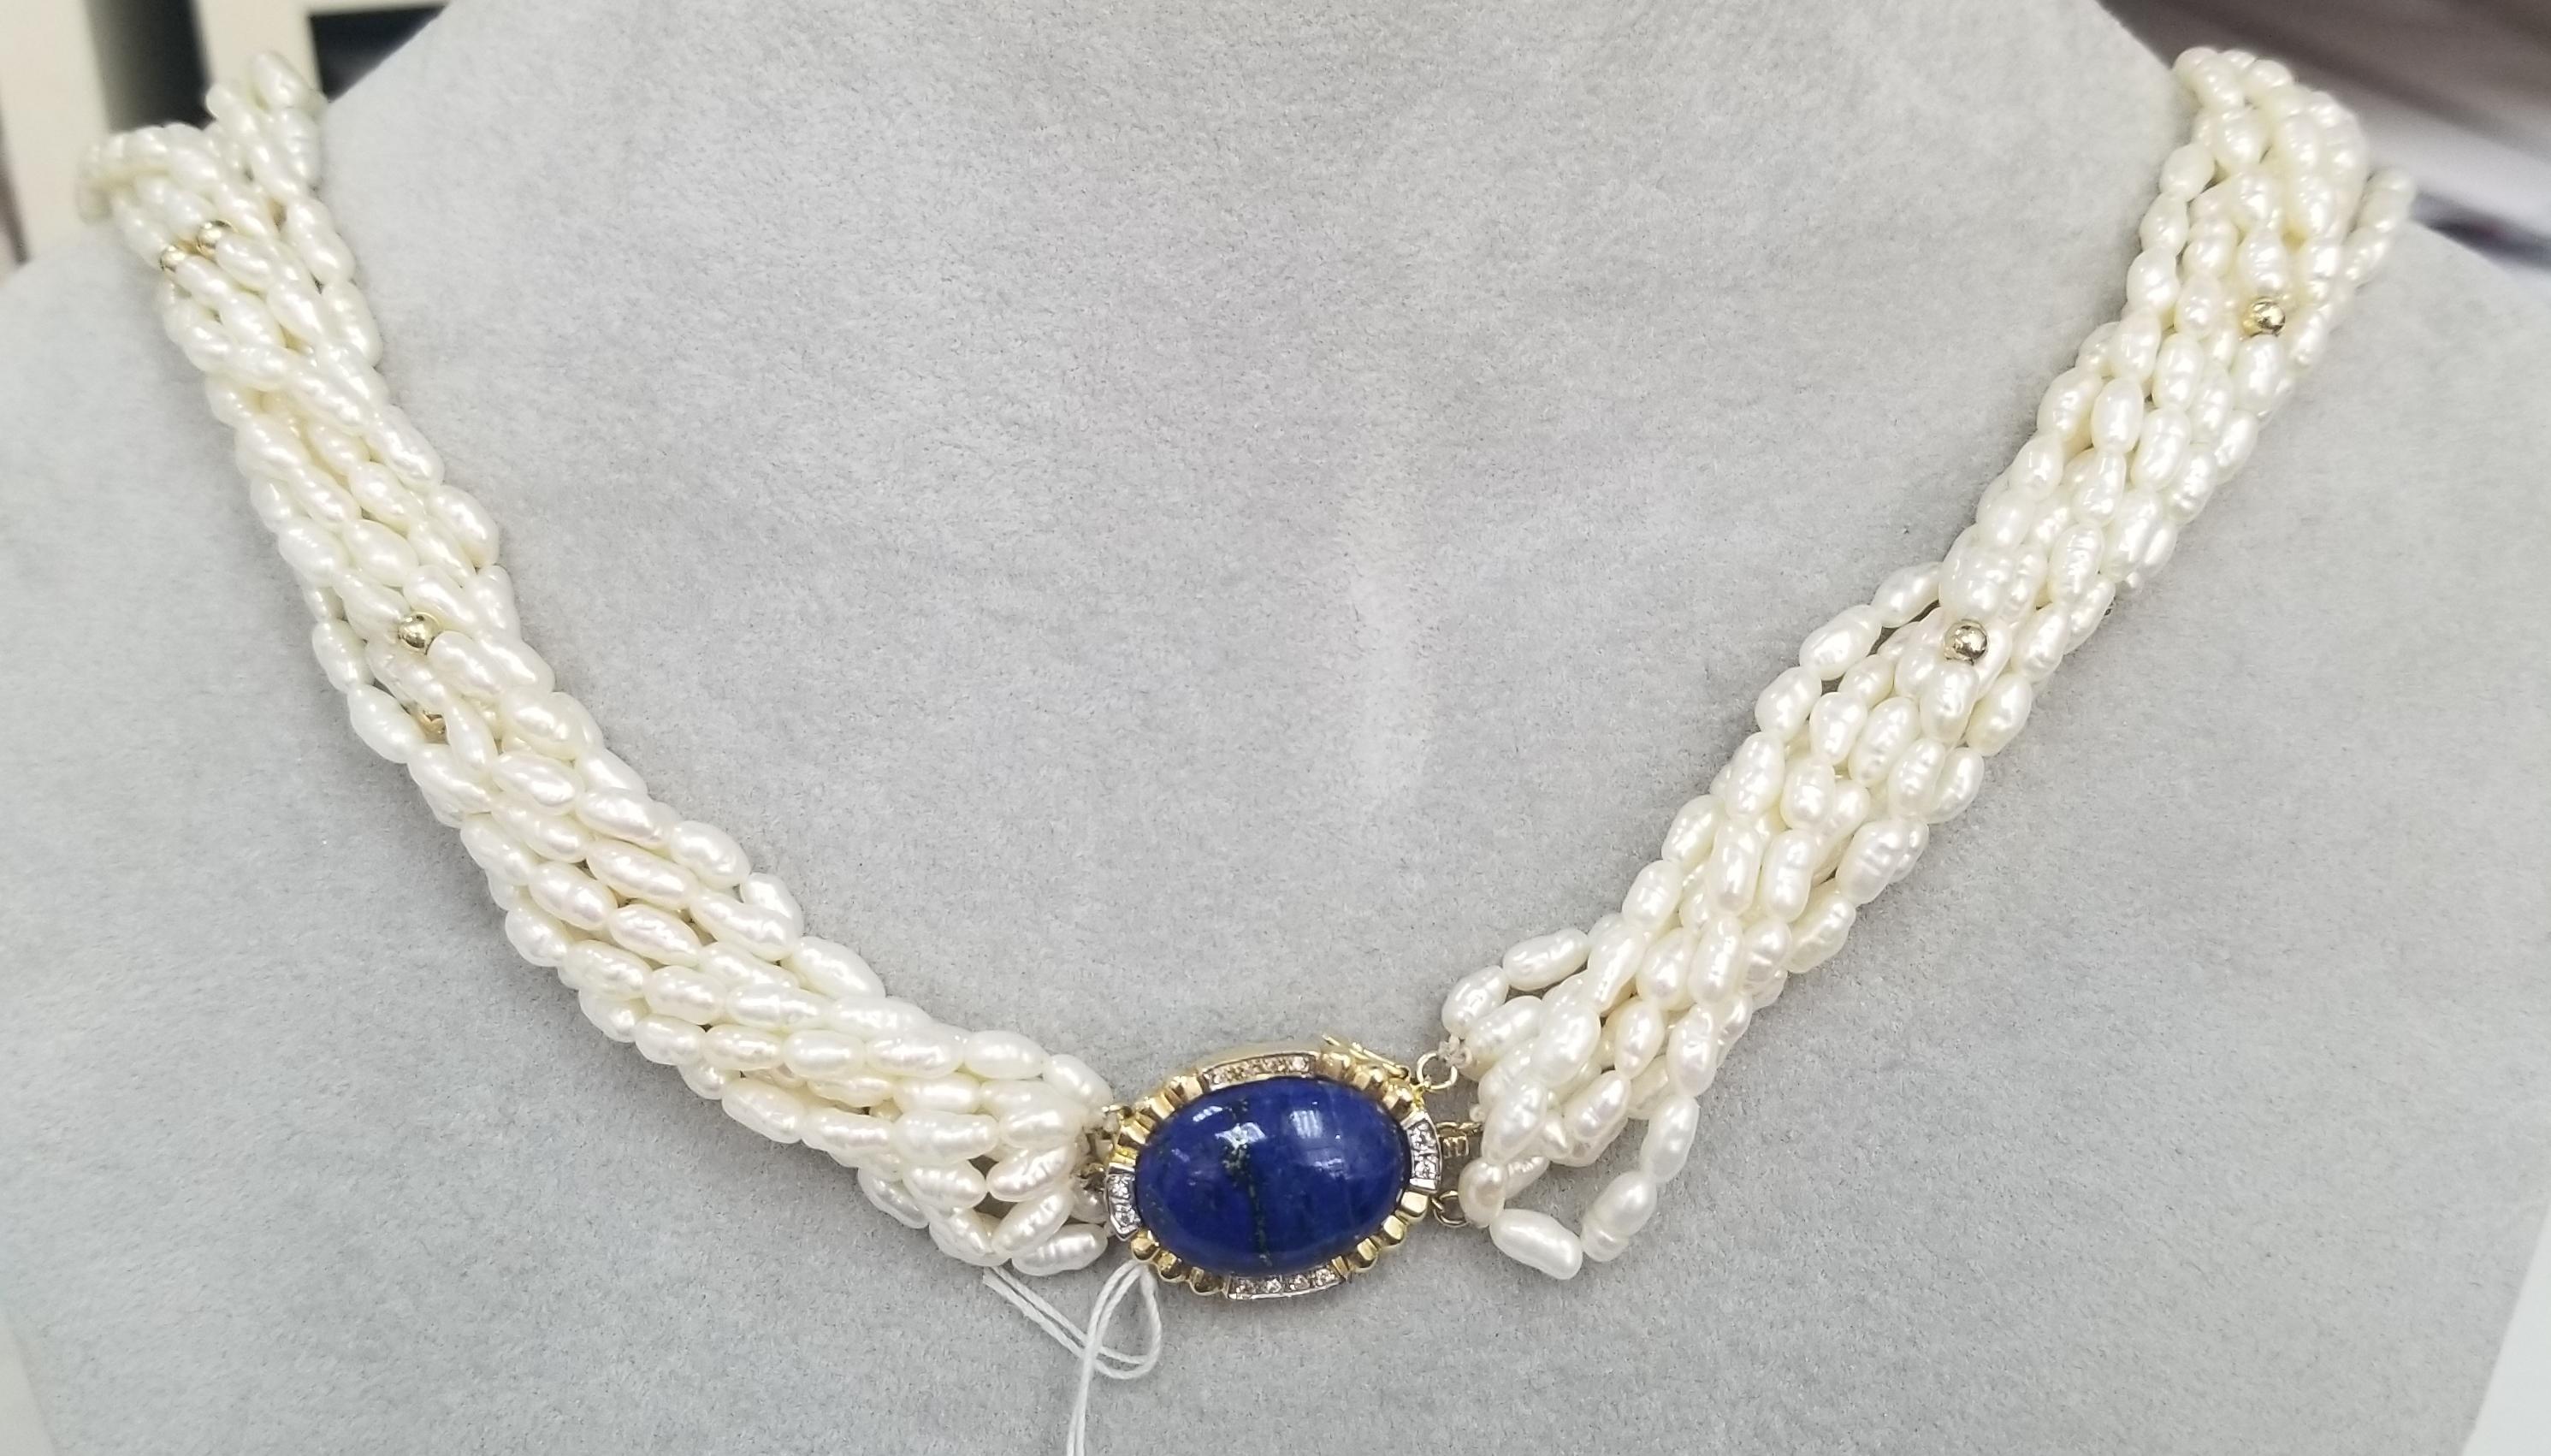 14k Yellow Gold Cabochon Lapis Lazuli and Diamond Necklace & Earring Set For Sale 2